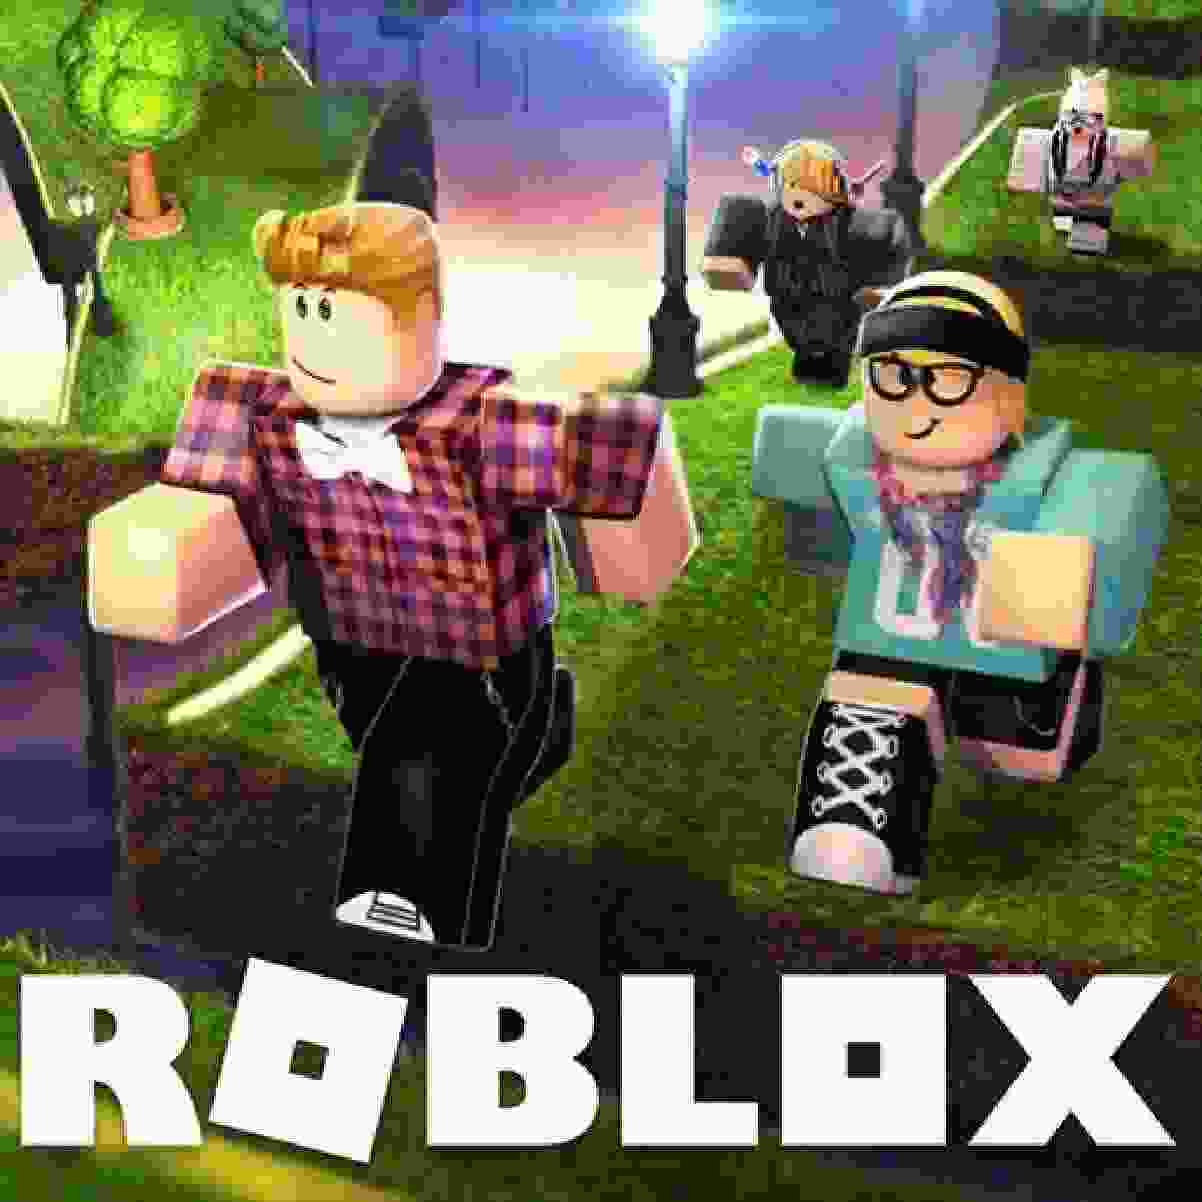 how to trade items in roblox